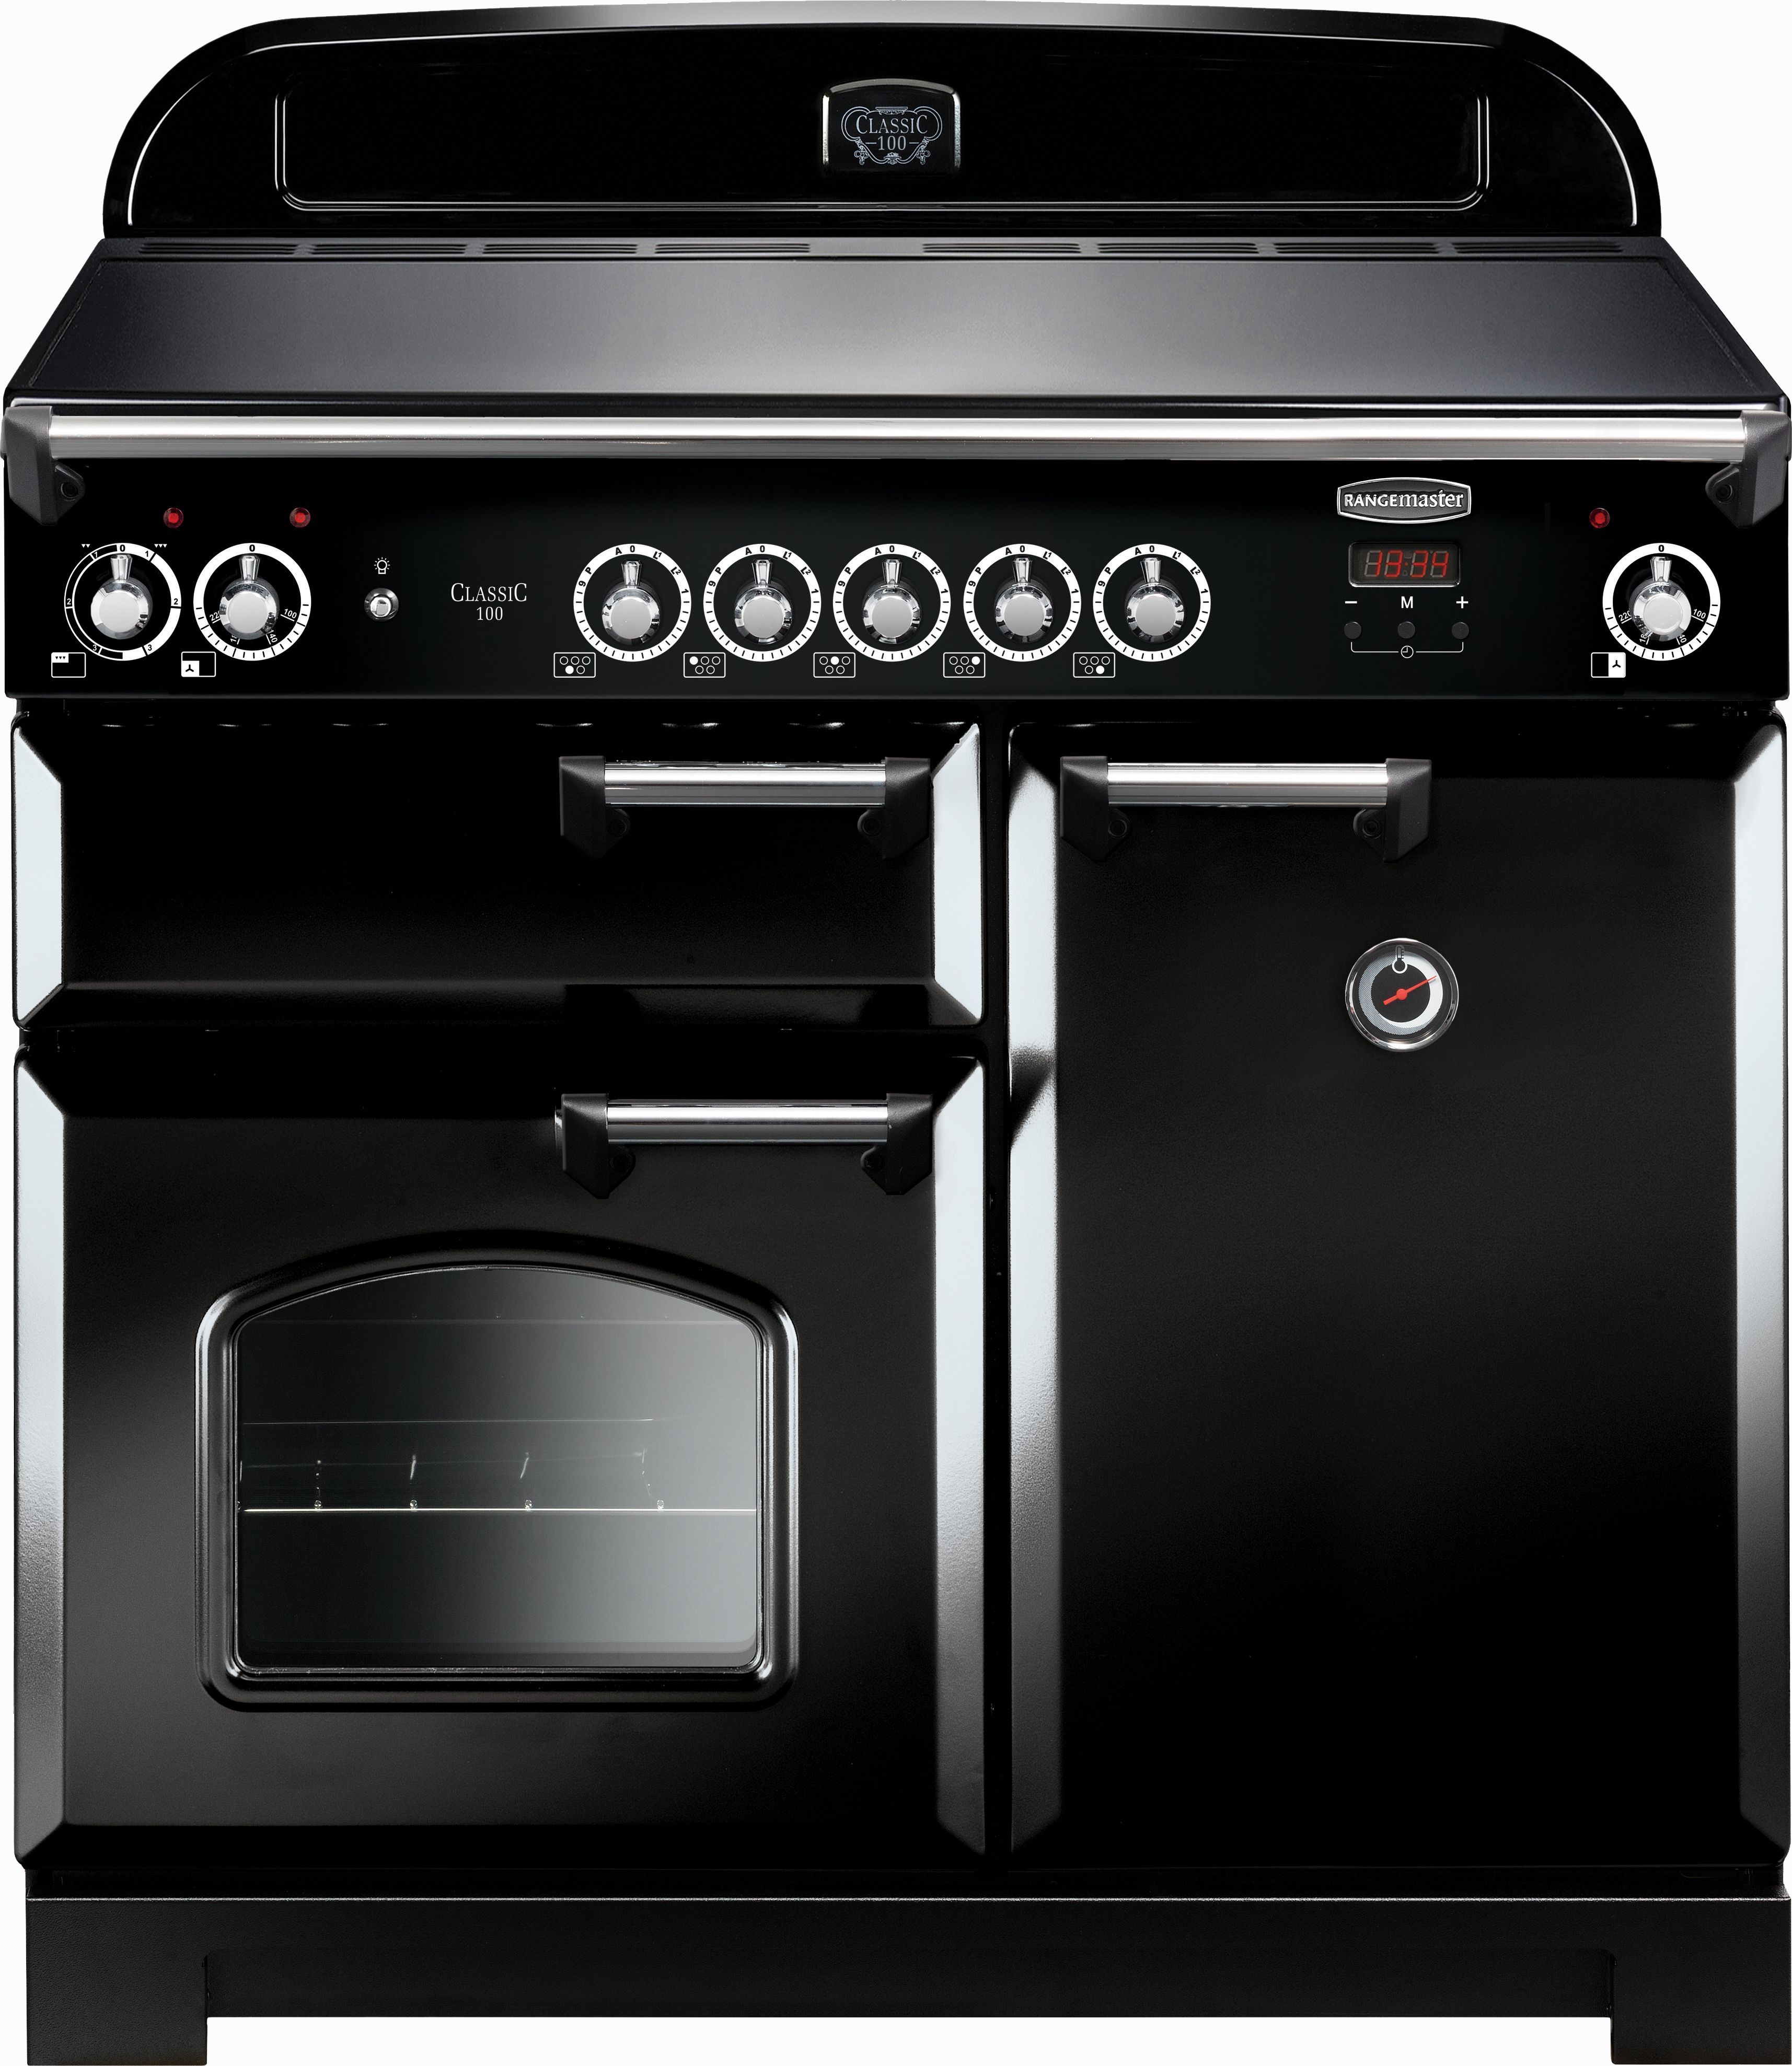 Rangemaster Classic CLA100EIBL/C 100cm Electric Range Cooker with Induction Hob - Black / Chrome - A/A Rated, Black